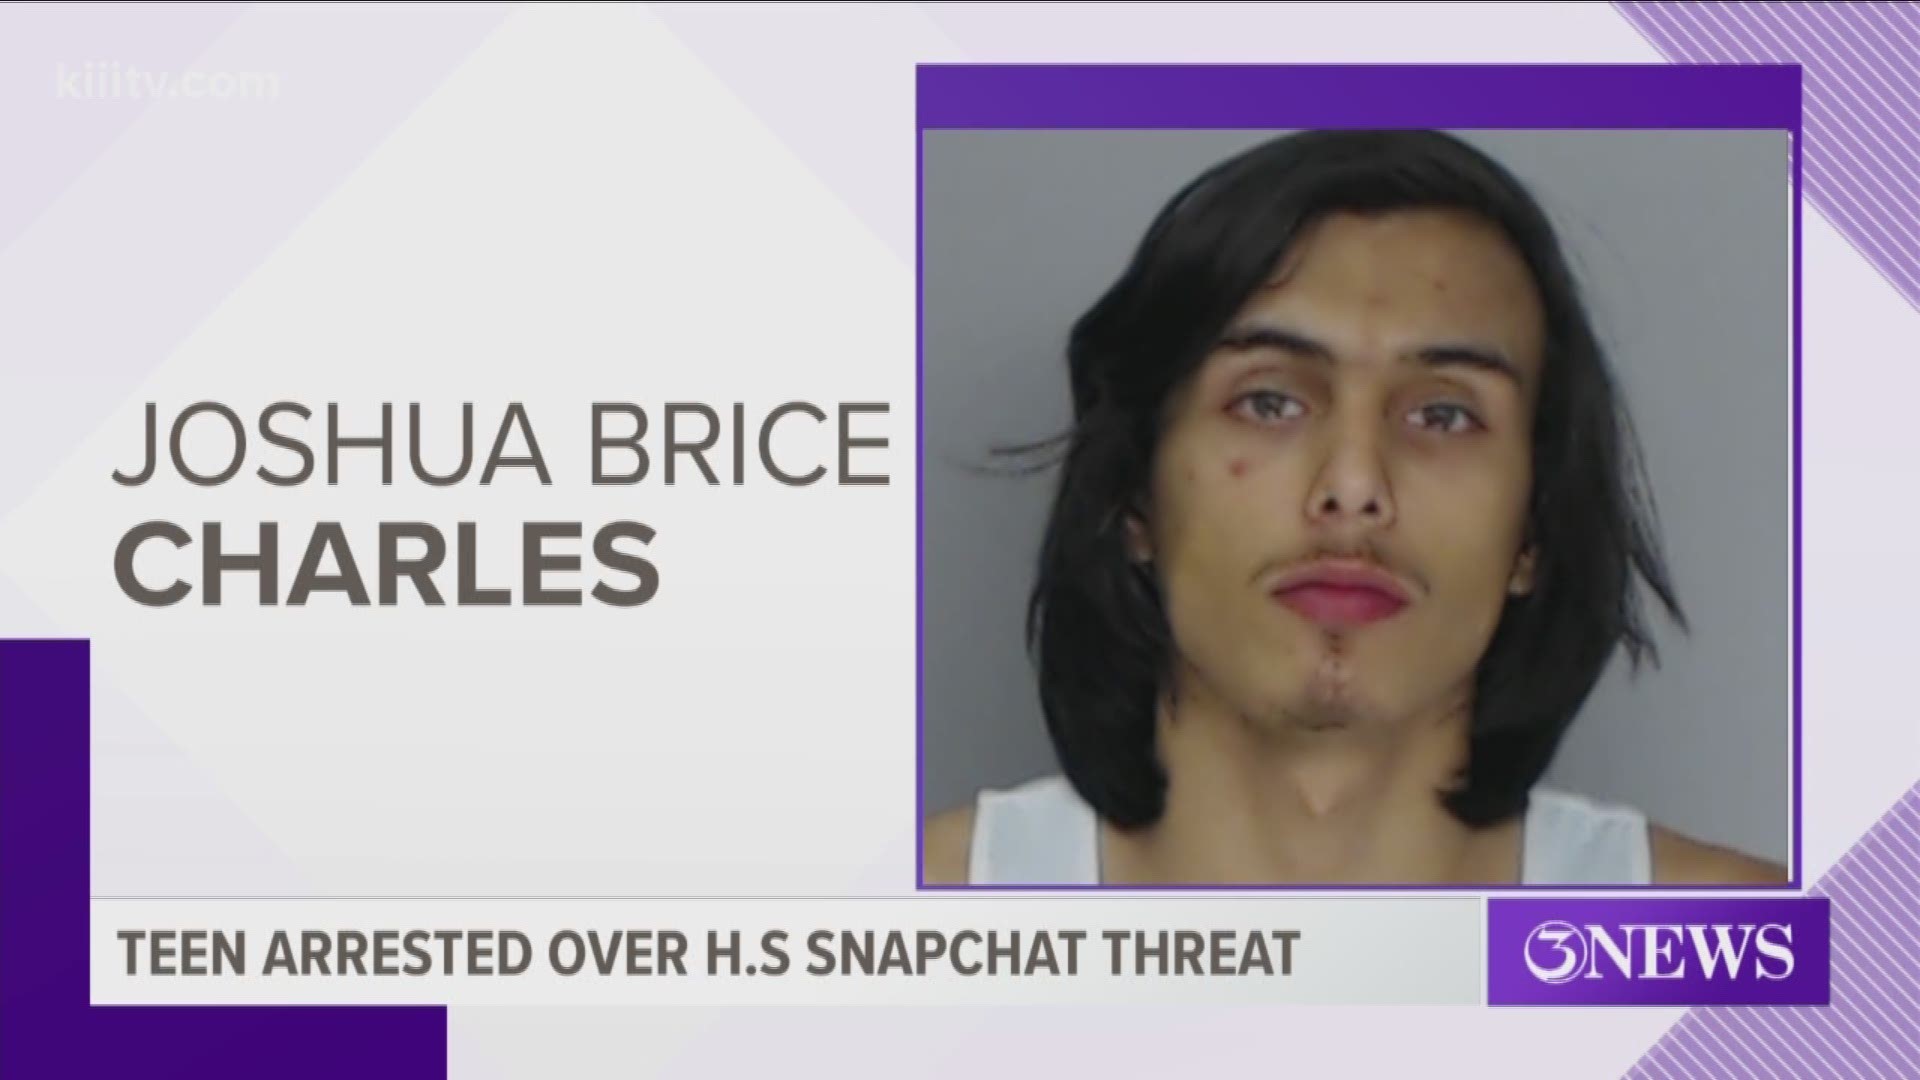 17-year-old Joshua Brice Charles was arrested on suspicion of making a terroristic threat and unlawful possession of a weapon.